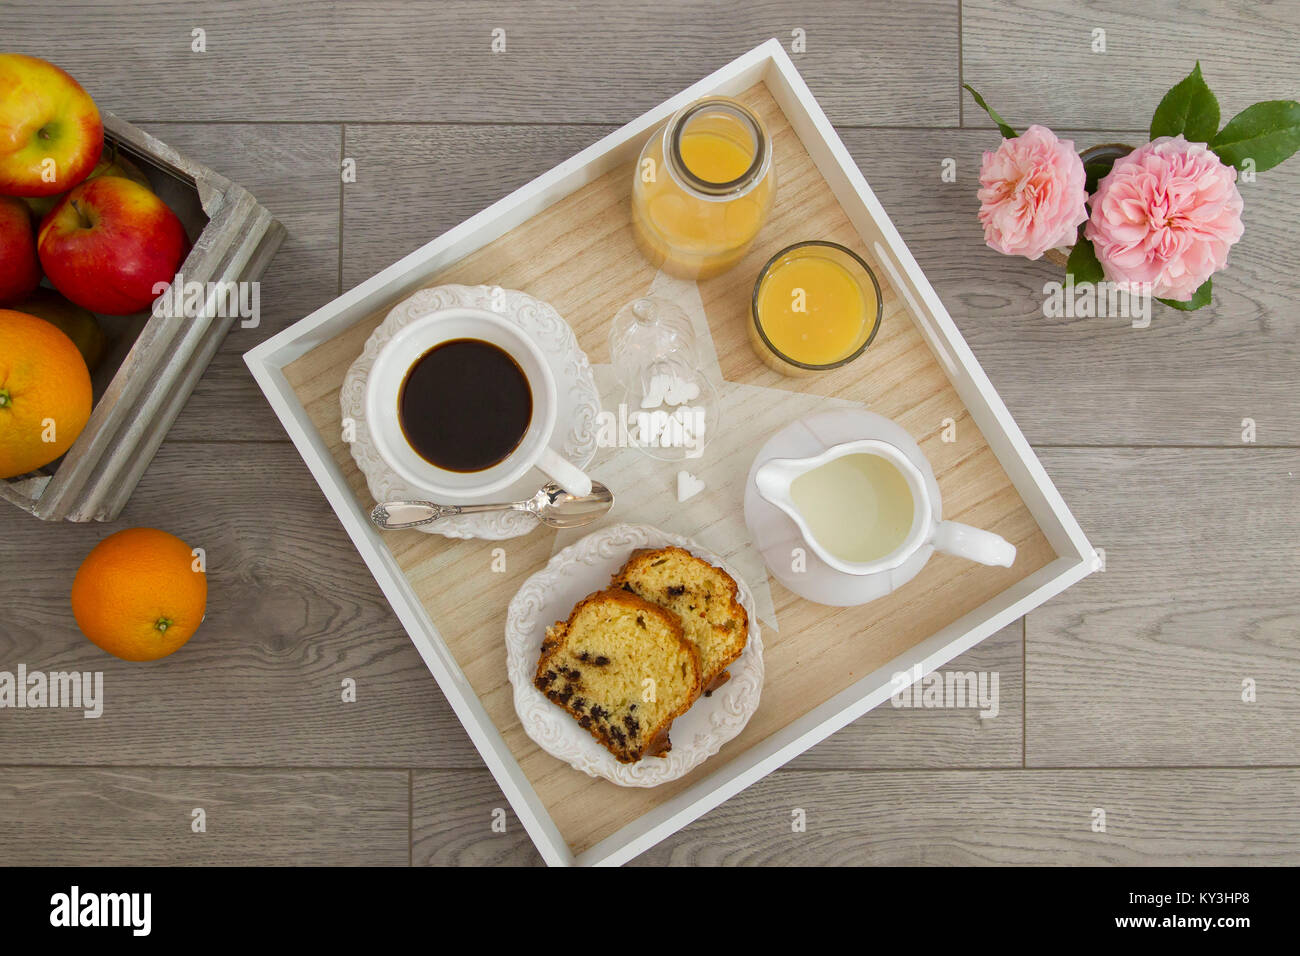 Breakfast seen from above, coffee, orange juice, milk, fruits and cake Stock Photo